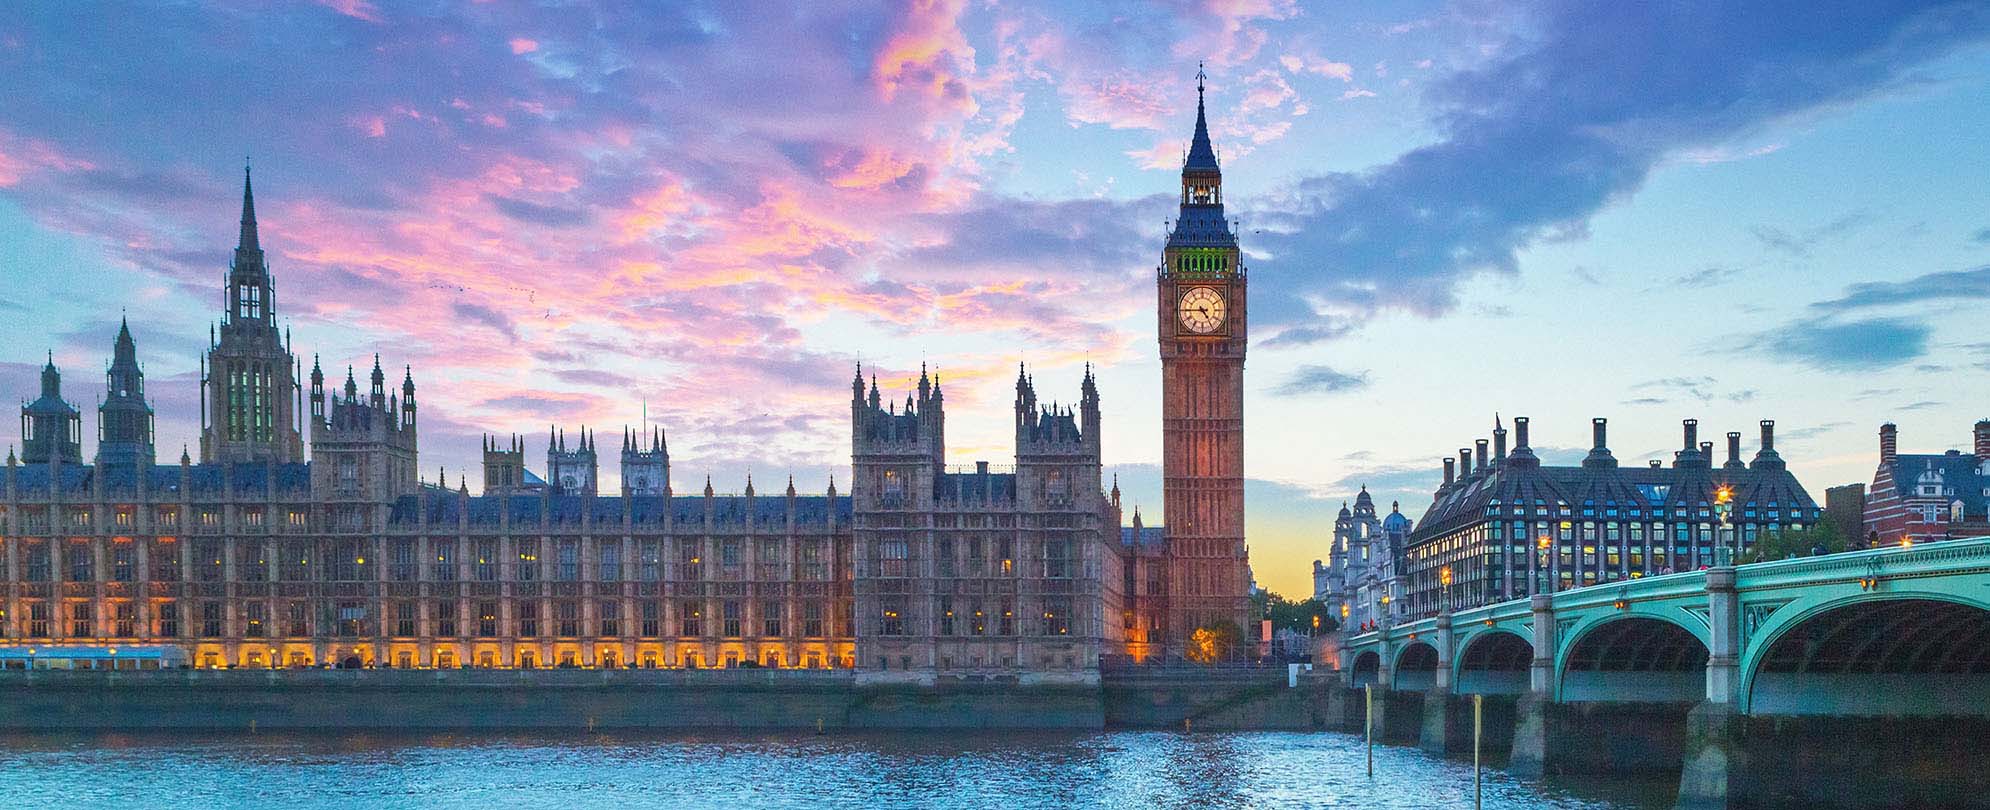 Big Ben and the Palace of Westminster at sunset in London